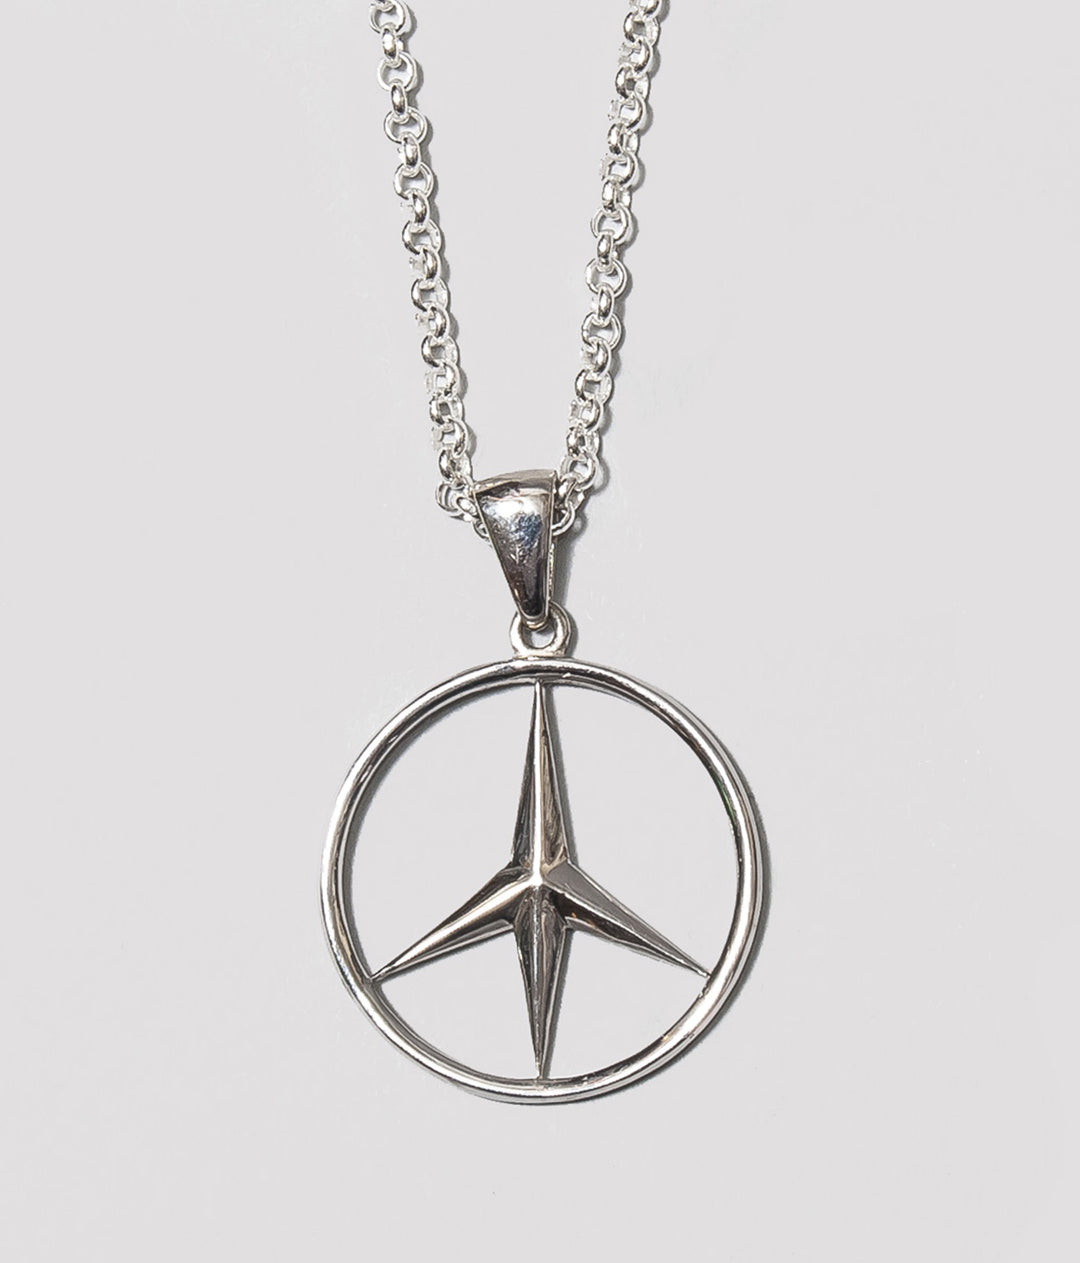 HOMIES PEACE PENDANT and CHAIN